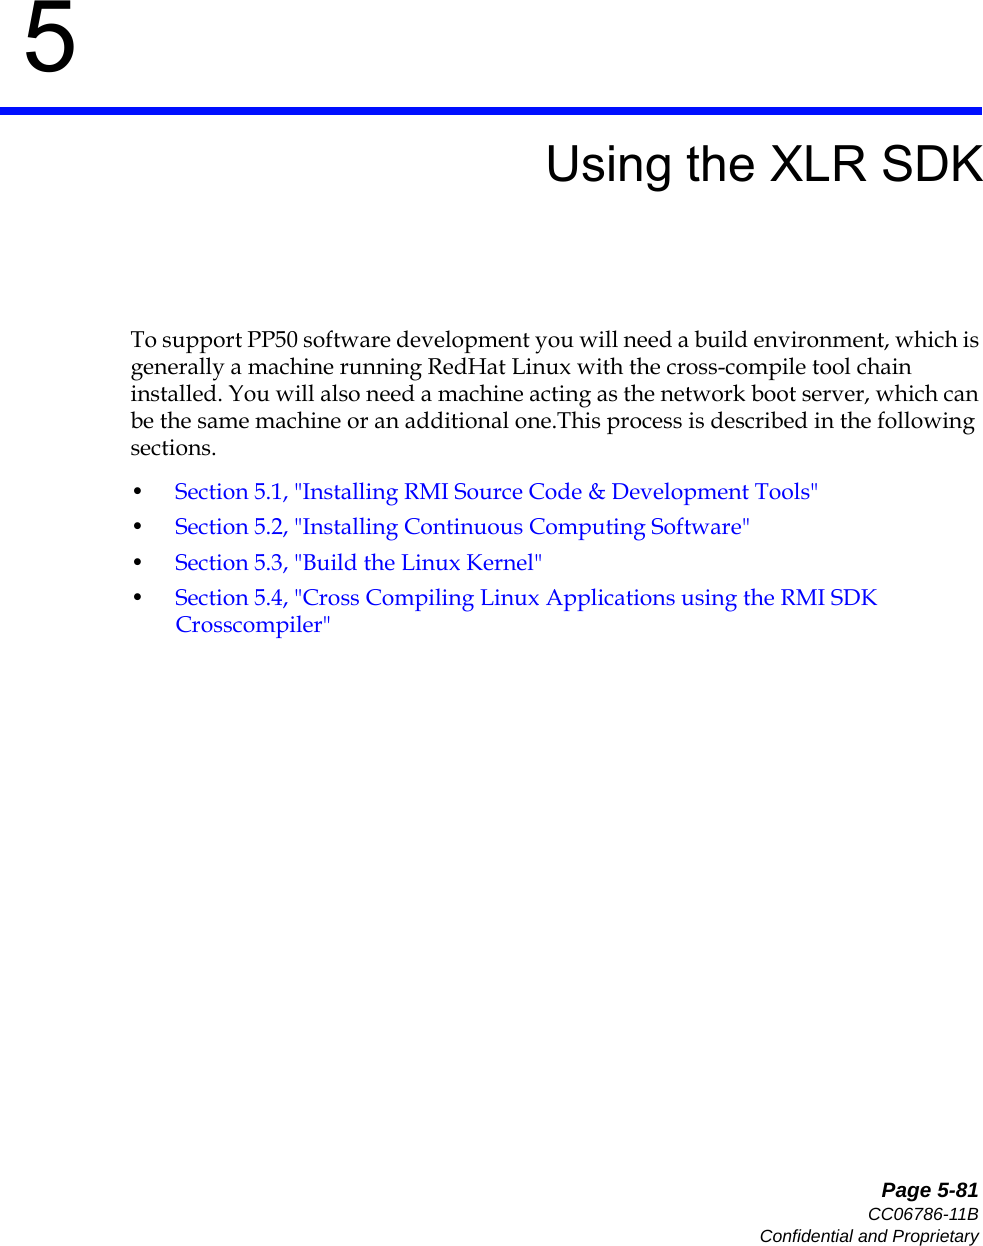   Page 5-81CC06786-11BConfidential and Proprietary5Preliminary5Using the XLR SDKTo support PP50 software development you will need a build environment, which is generally a machine running RedHat Linux with the cross-compile tool chain installed. You will also need a machine acting as the network boot server, which can be the same machine or an additional one.This process is described in the following sections. •Section5.1, &quot;Installing RMI Source Code &amp; Development Tools&quot;•Section5.2, &quot;Installing Continuous Computing Software&quot;•Section5.3, &quot;Build the Linux Kernel&quot;•Section5.4, &quot;Cross Compiling Linux Applications using the RMI SDK Crosscompiler&quot;